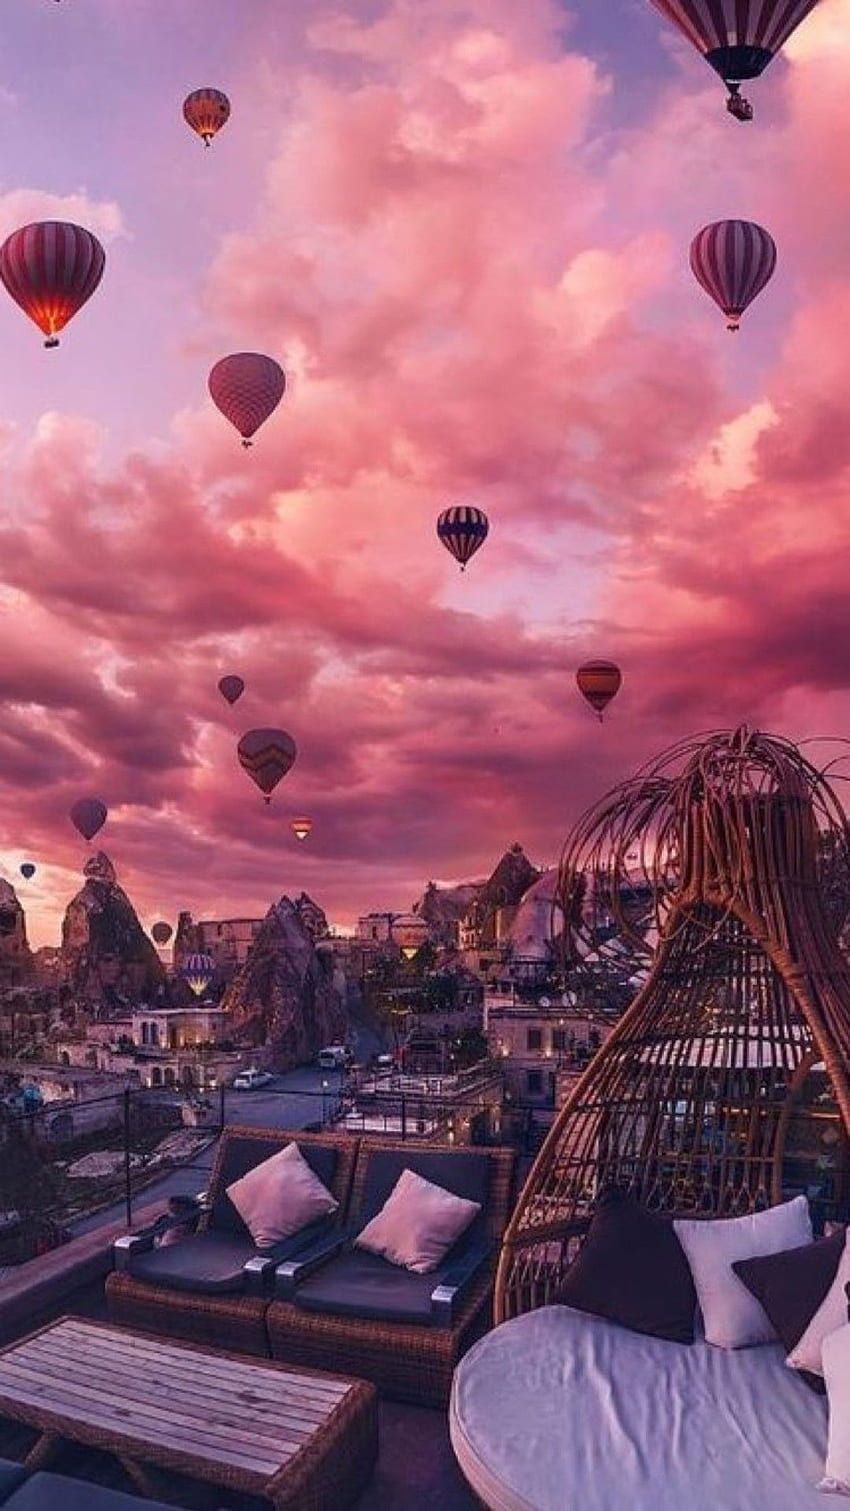 A view of hot air balloons flying over the city - Hot air balloons